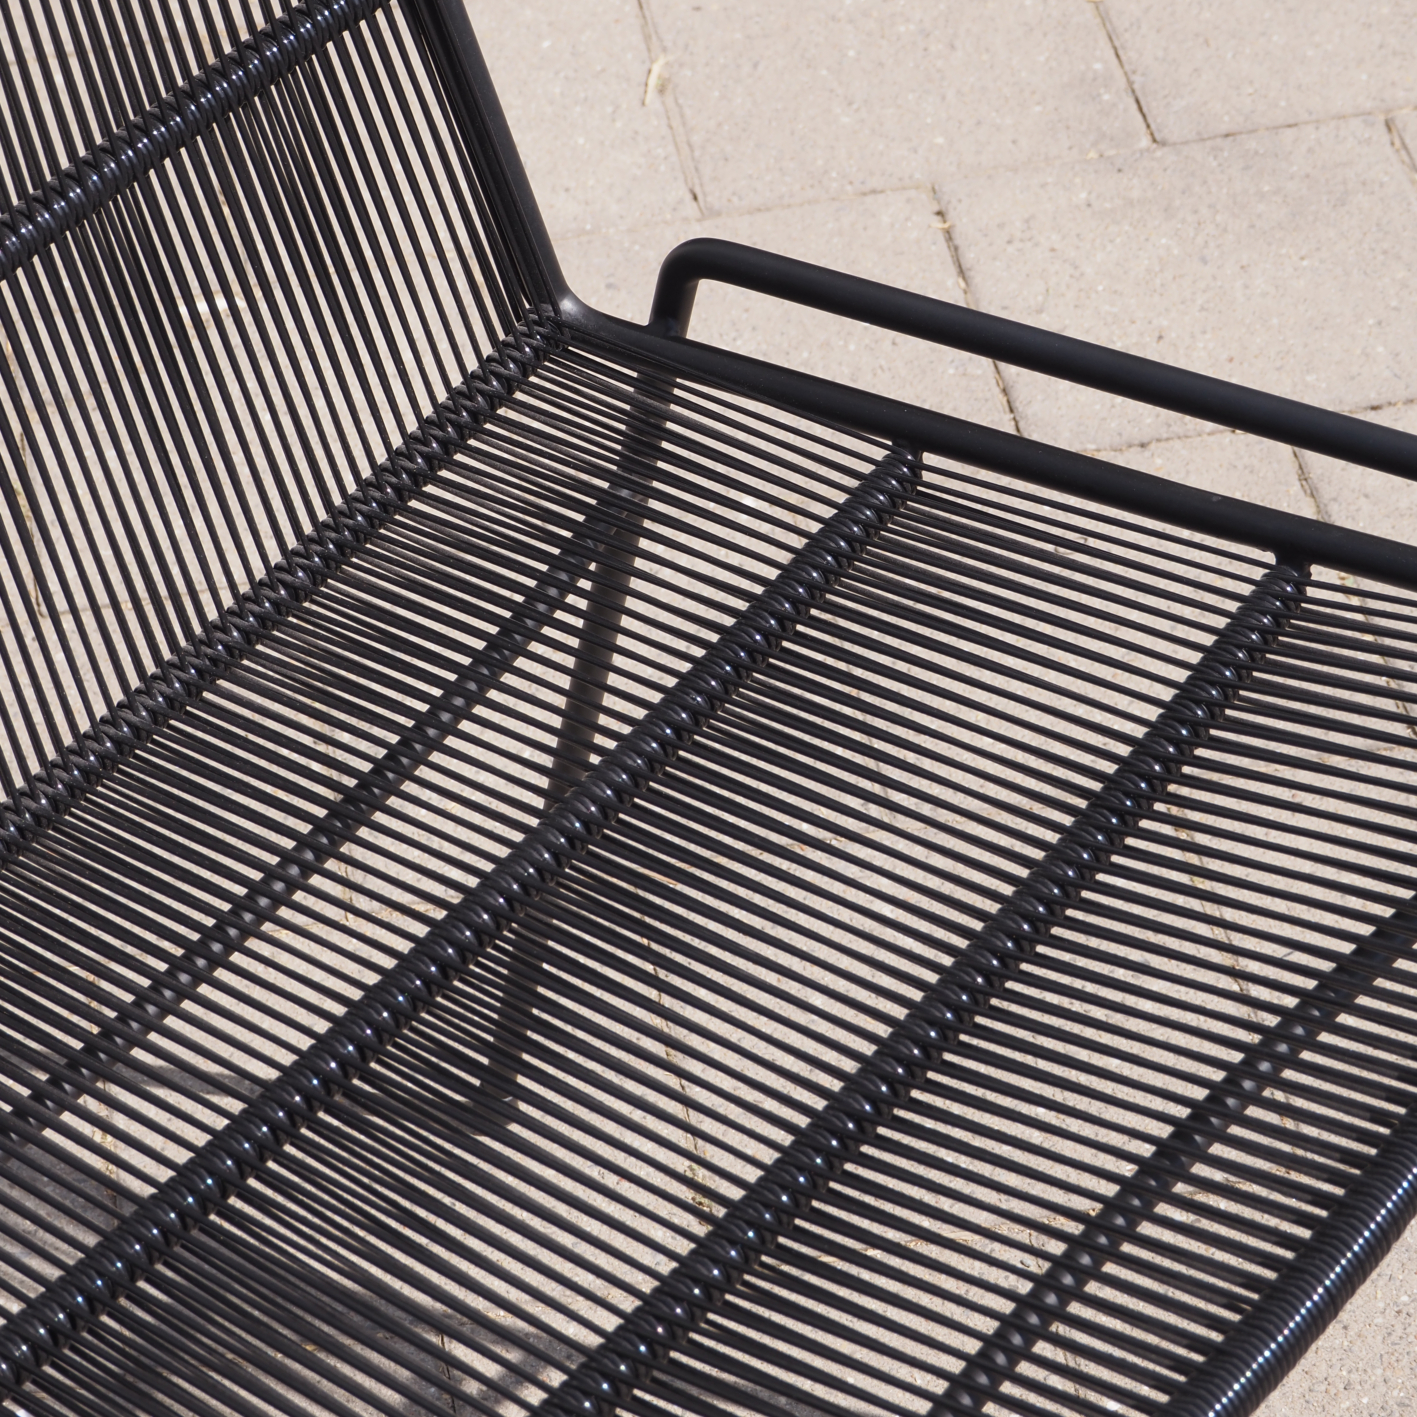 Exterior chair 'Abaco' by Paola Navone for Serax - Black/Black